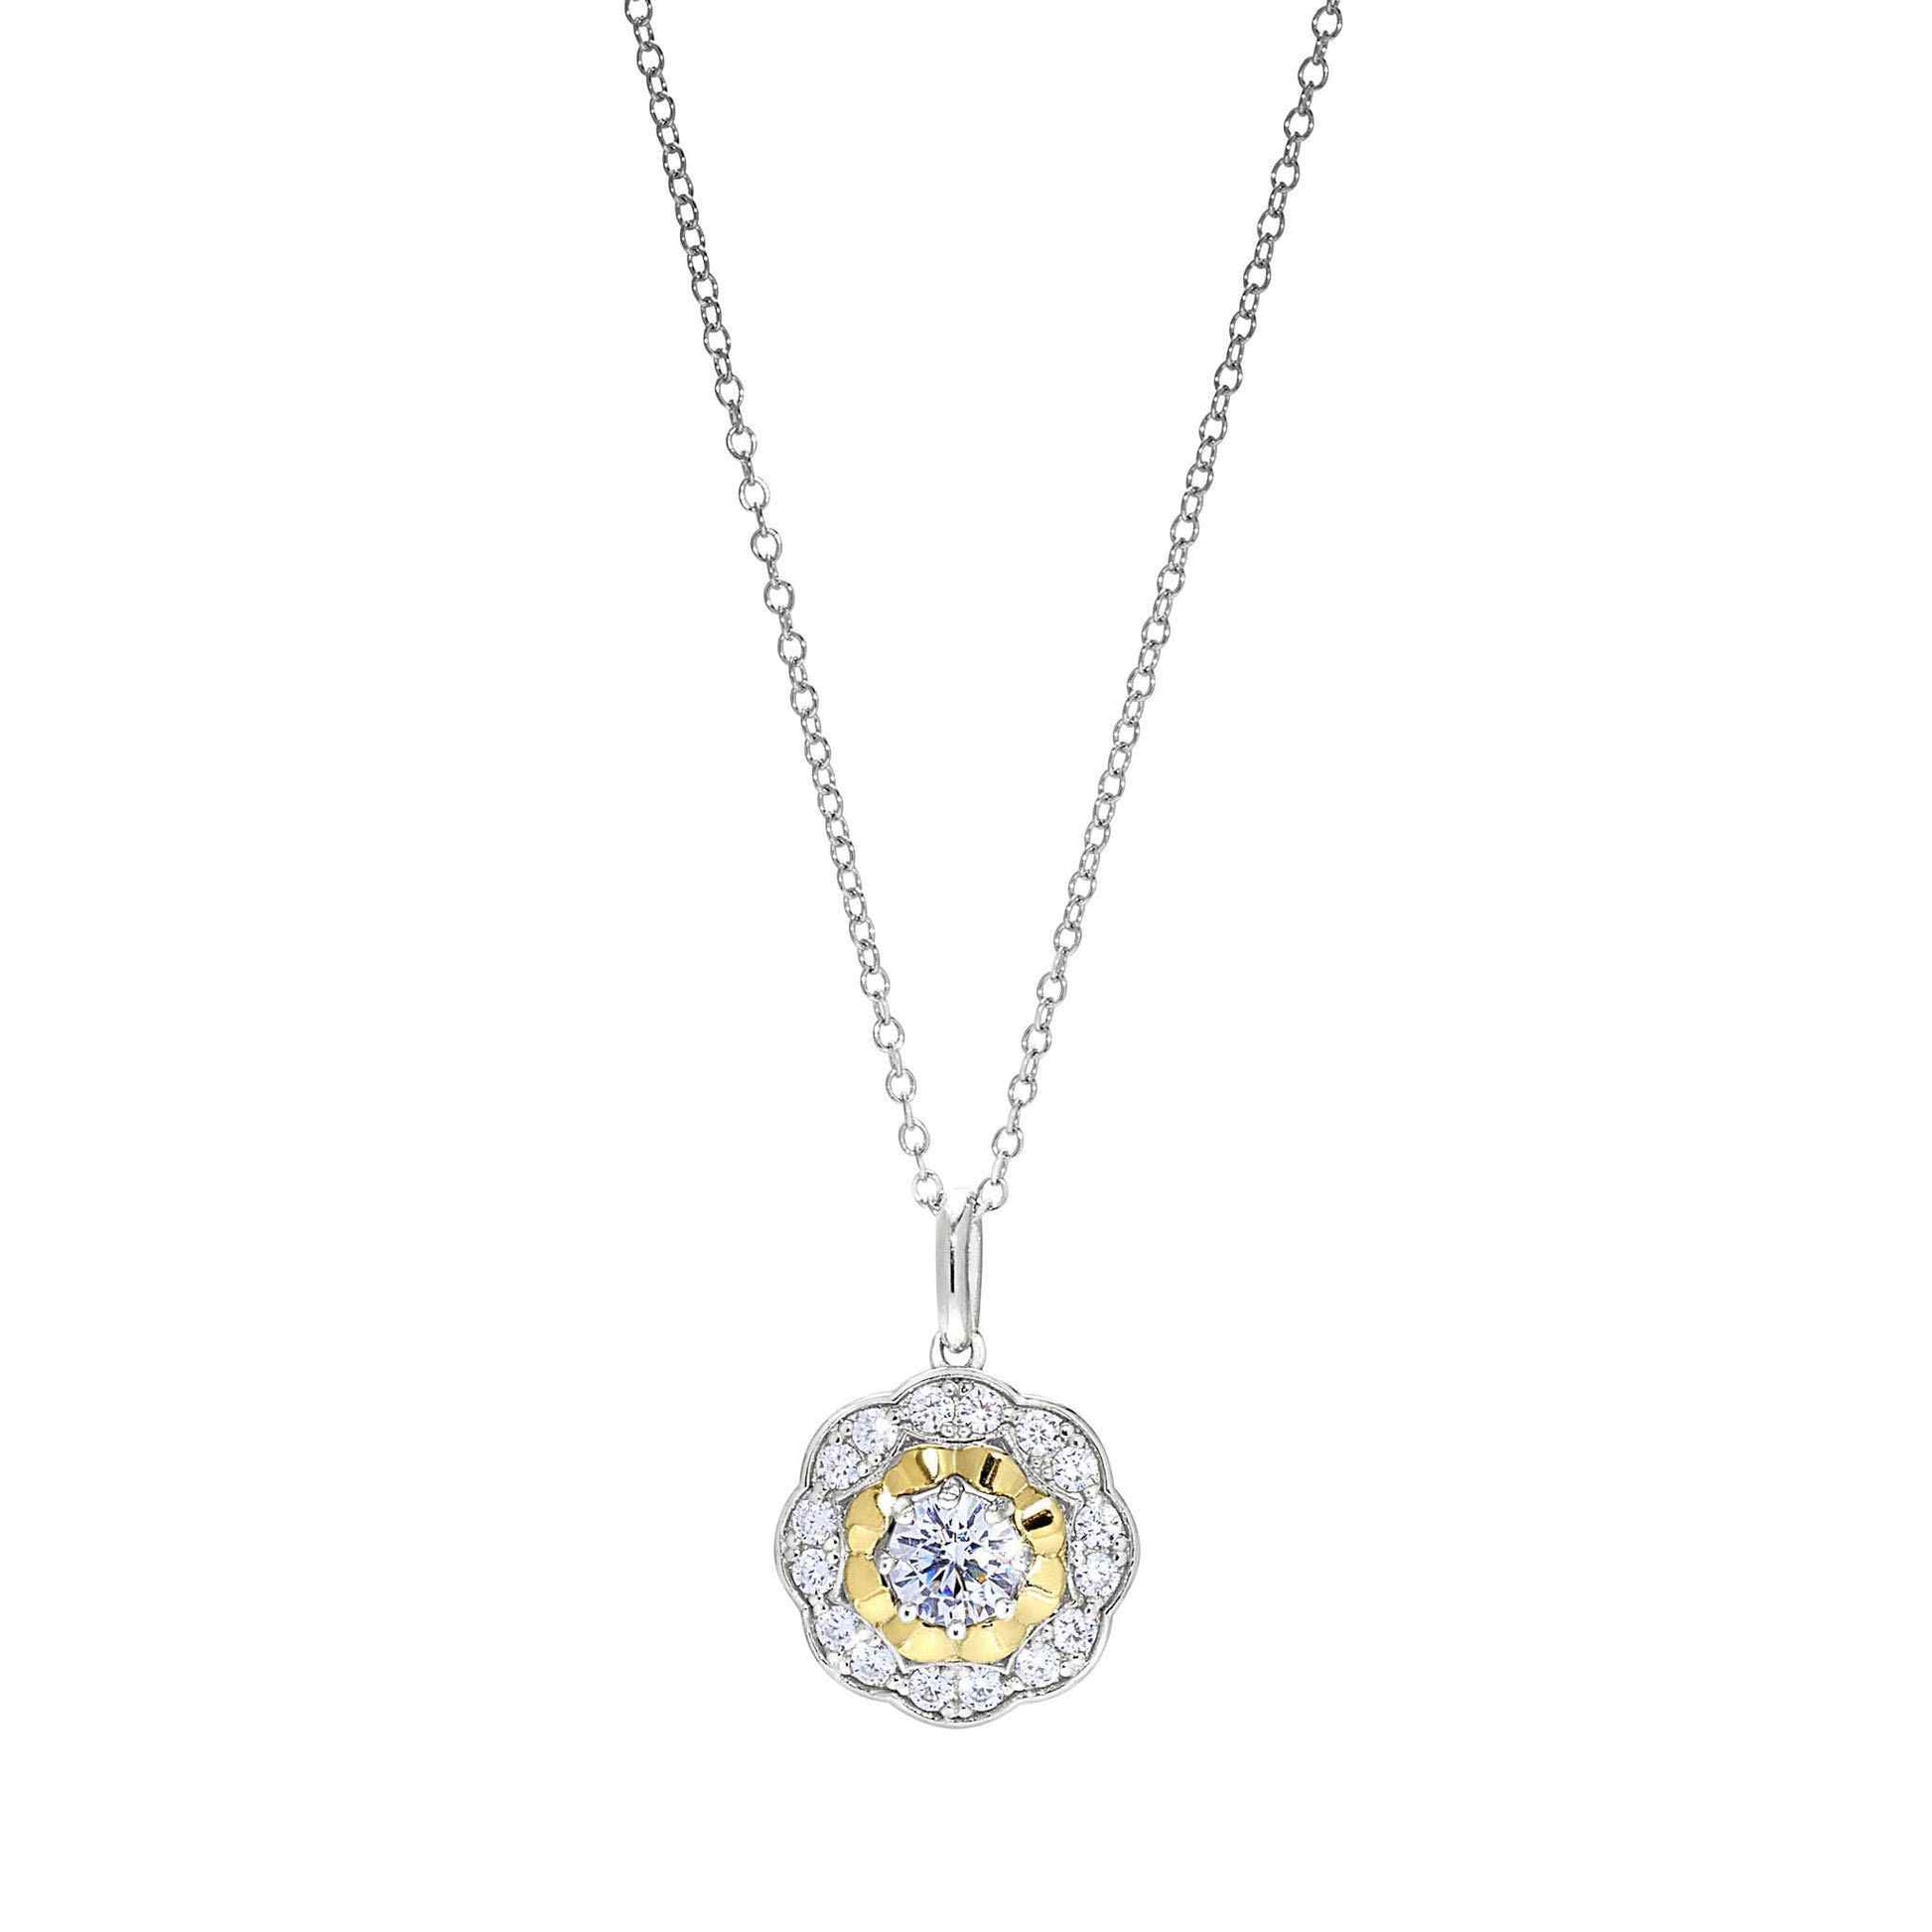 A two tone flower pendant with simulated diamonds on 18' cable chain displayed on a neutral white background.